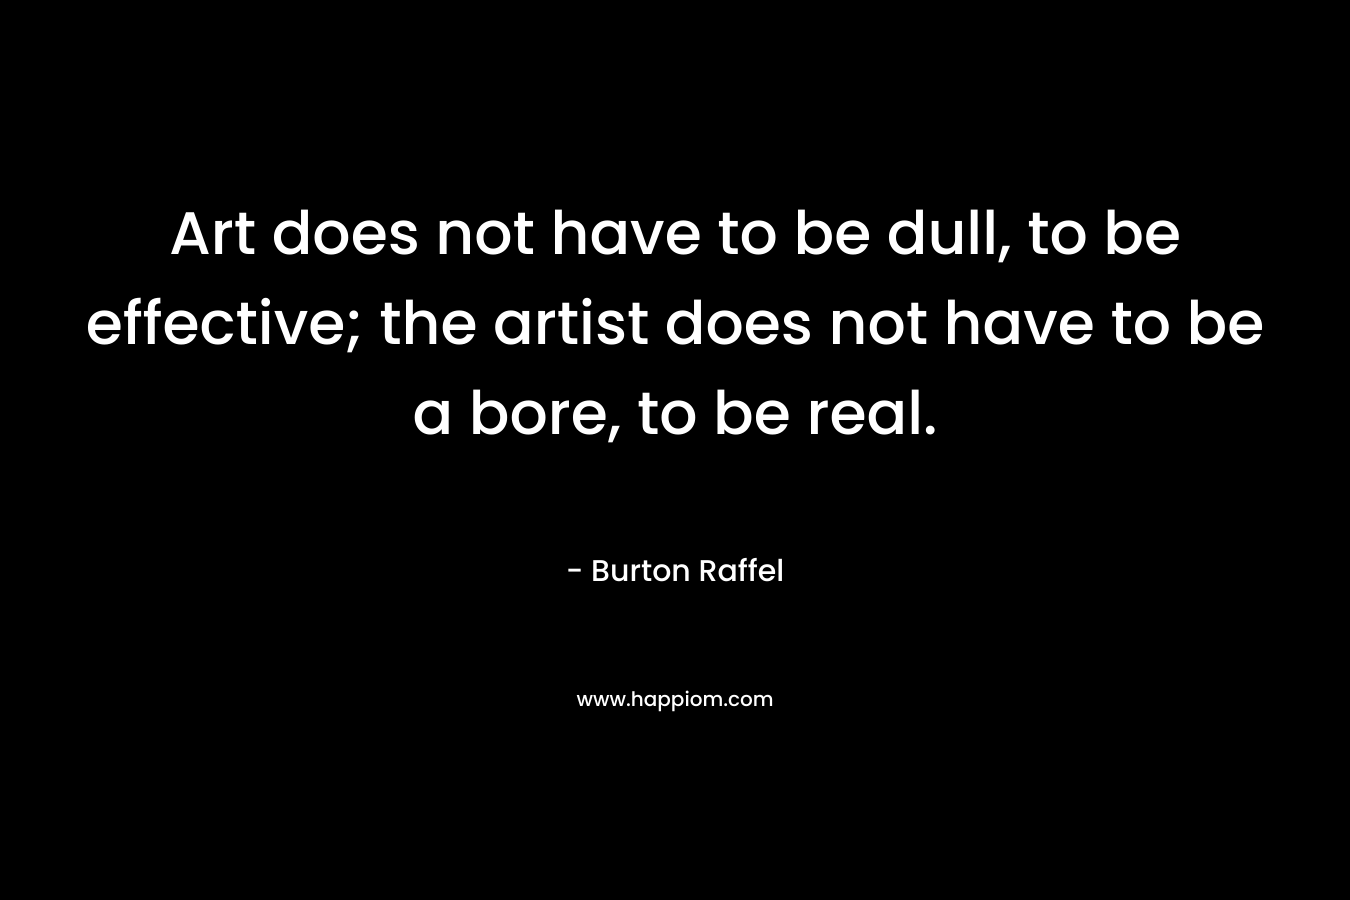 Art does not have to be dull, to be effective; the artist does not have to be a bore, to be real.